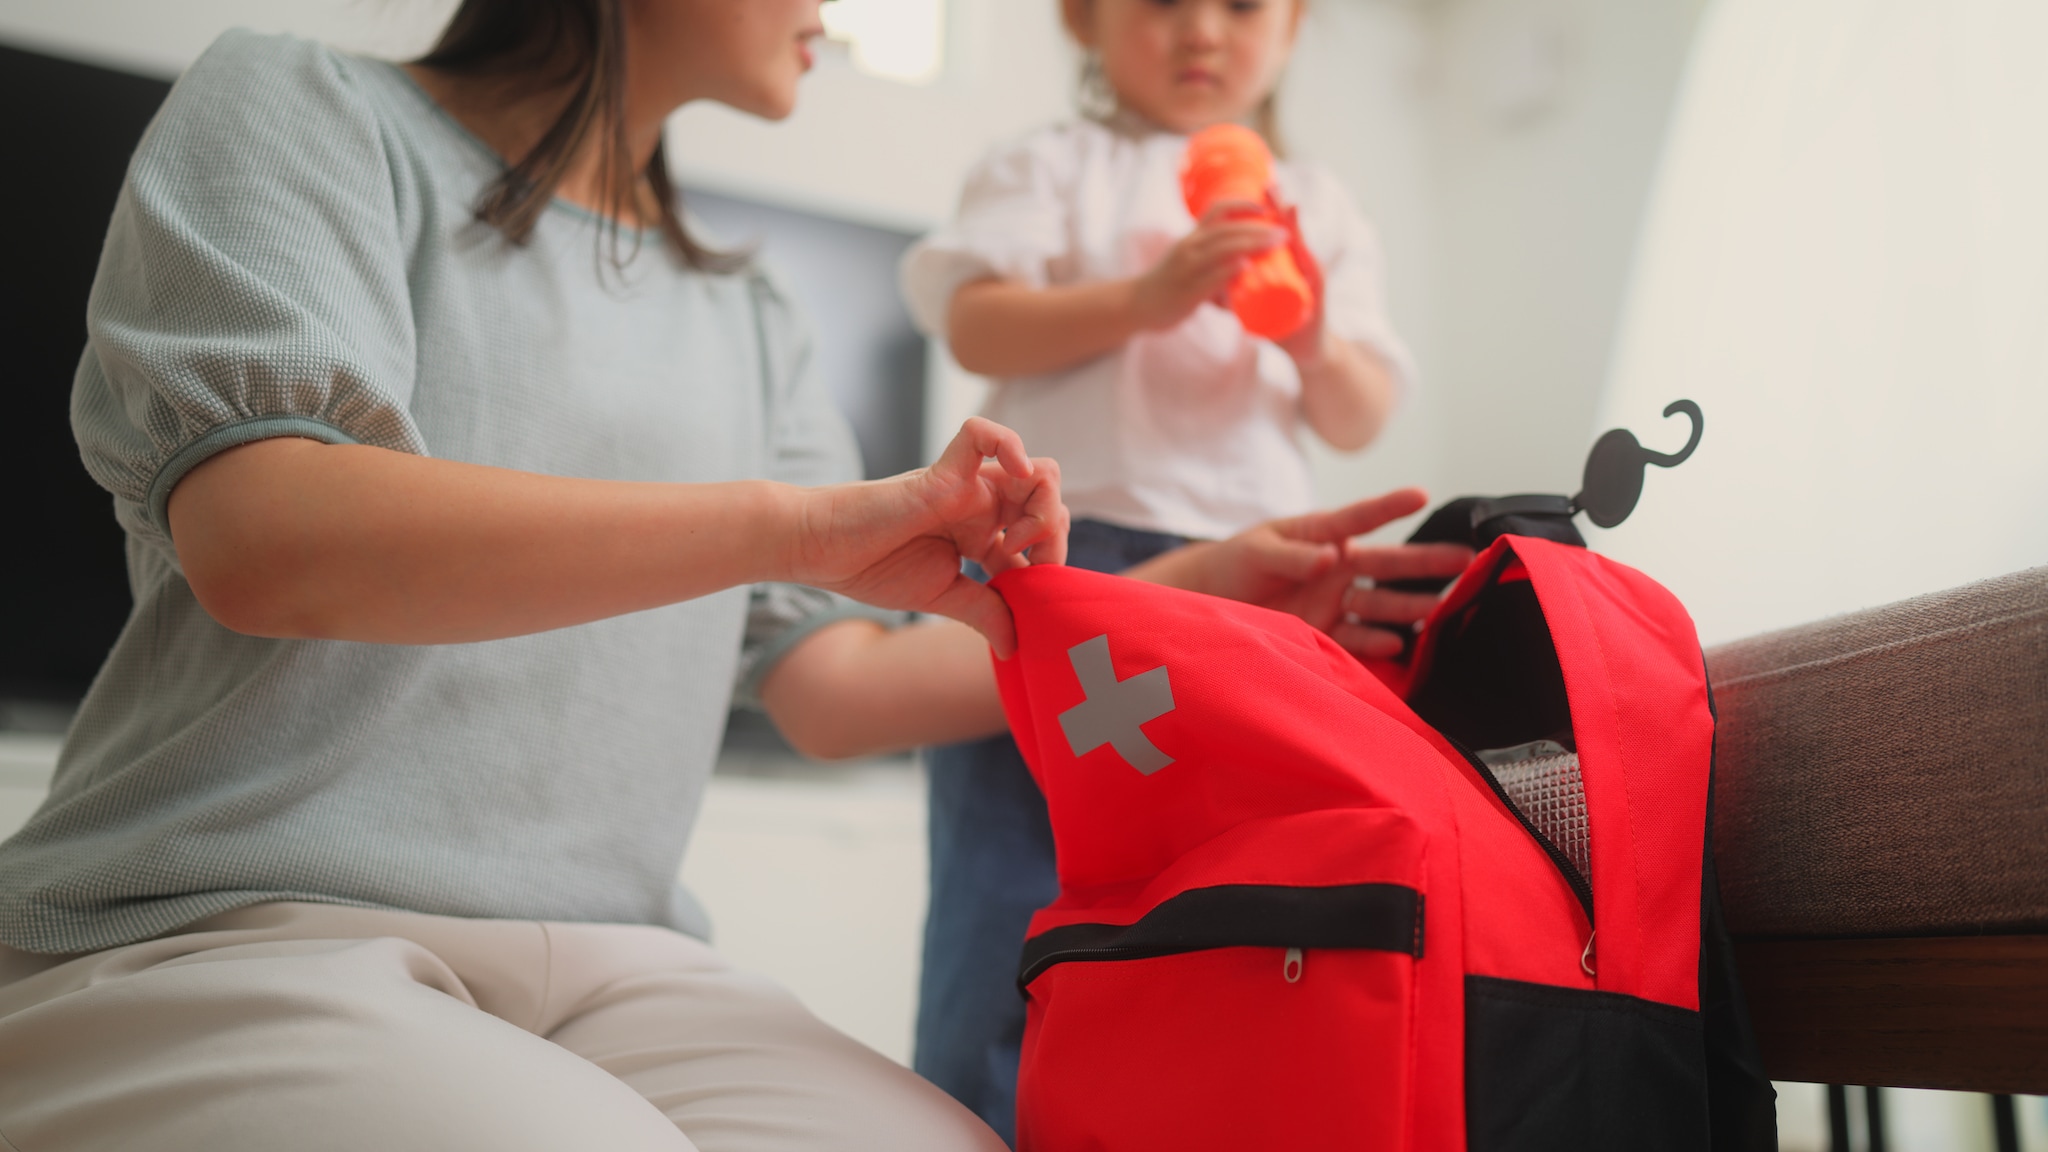 Woman packing child's bag for school